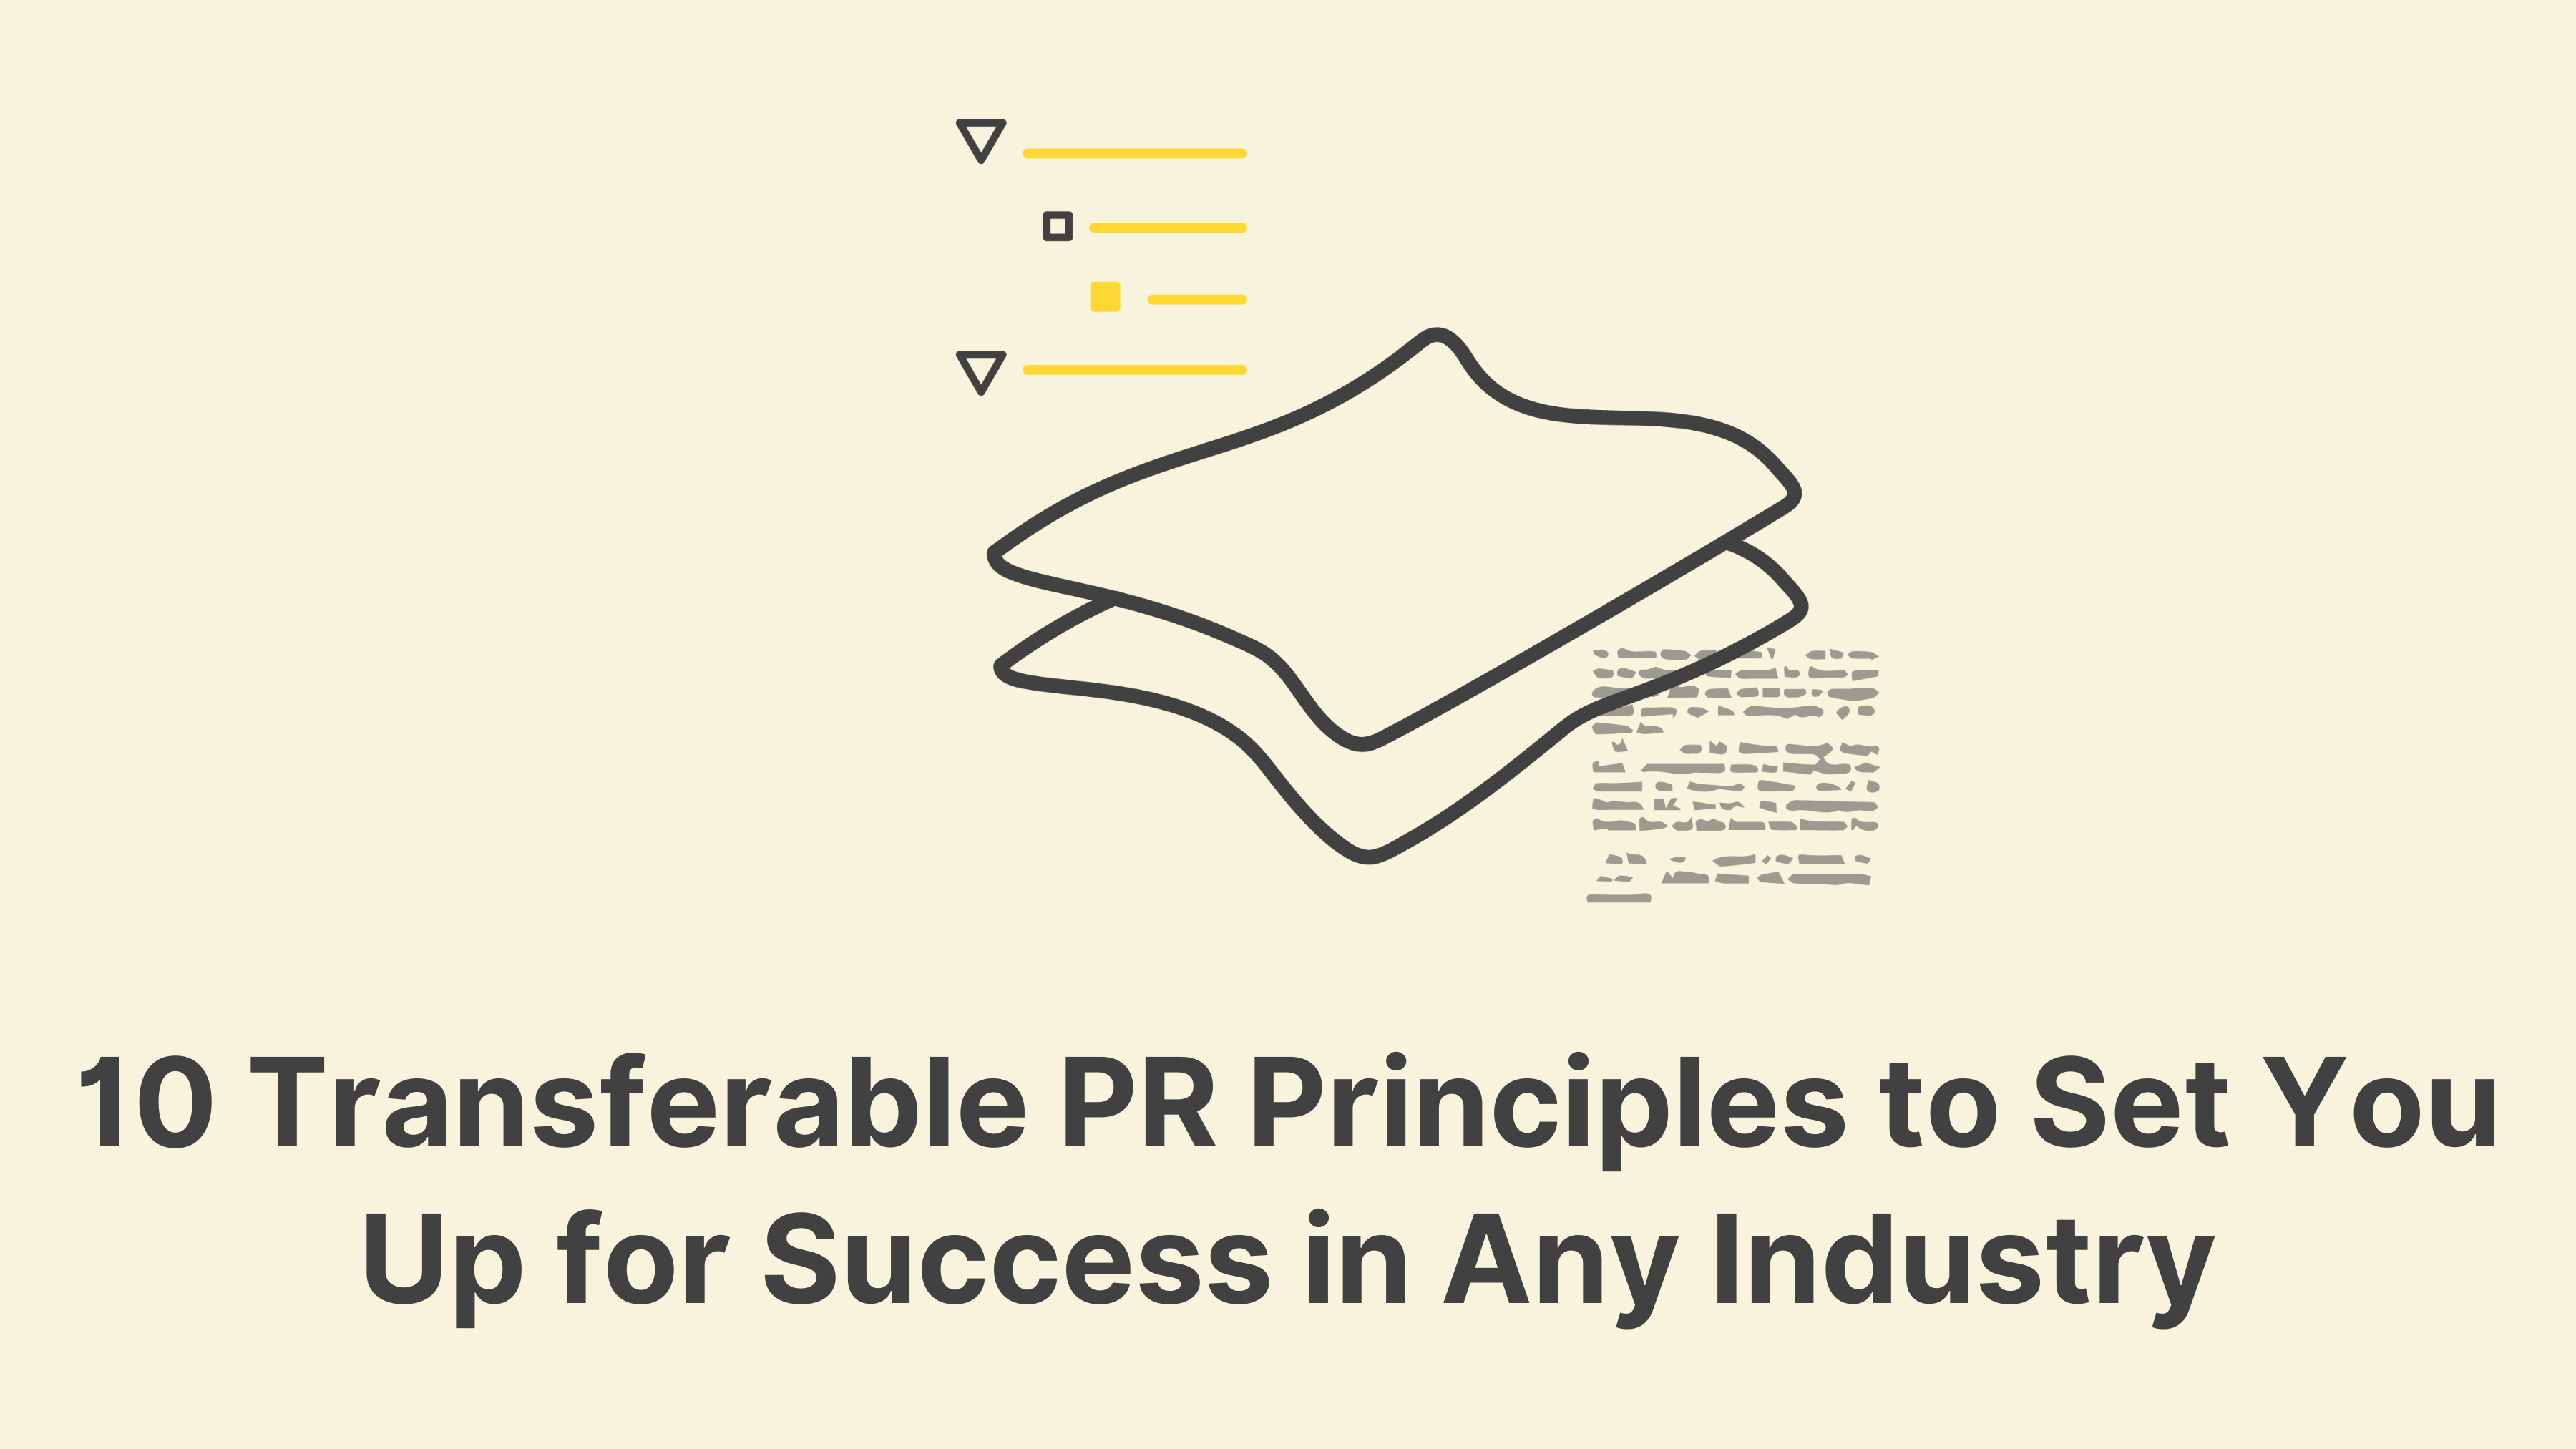 10 Transferable PR Principles to Set You Up for Success in Any Industry